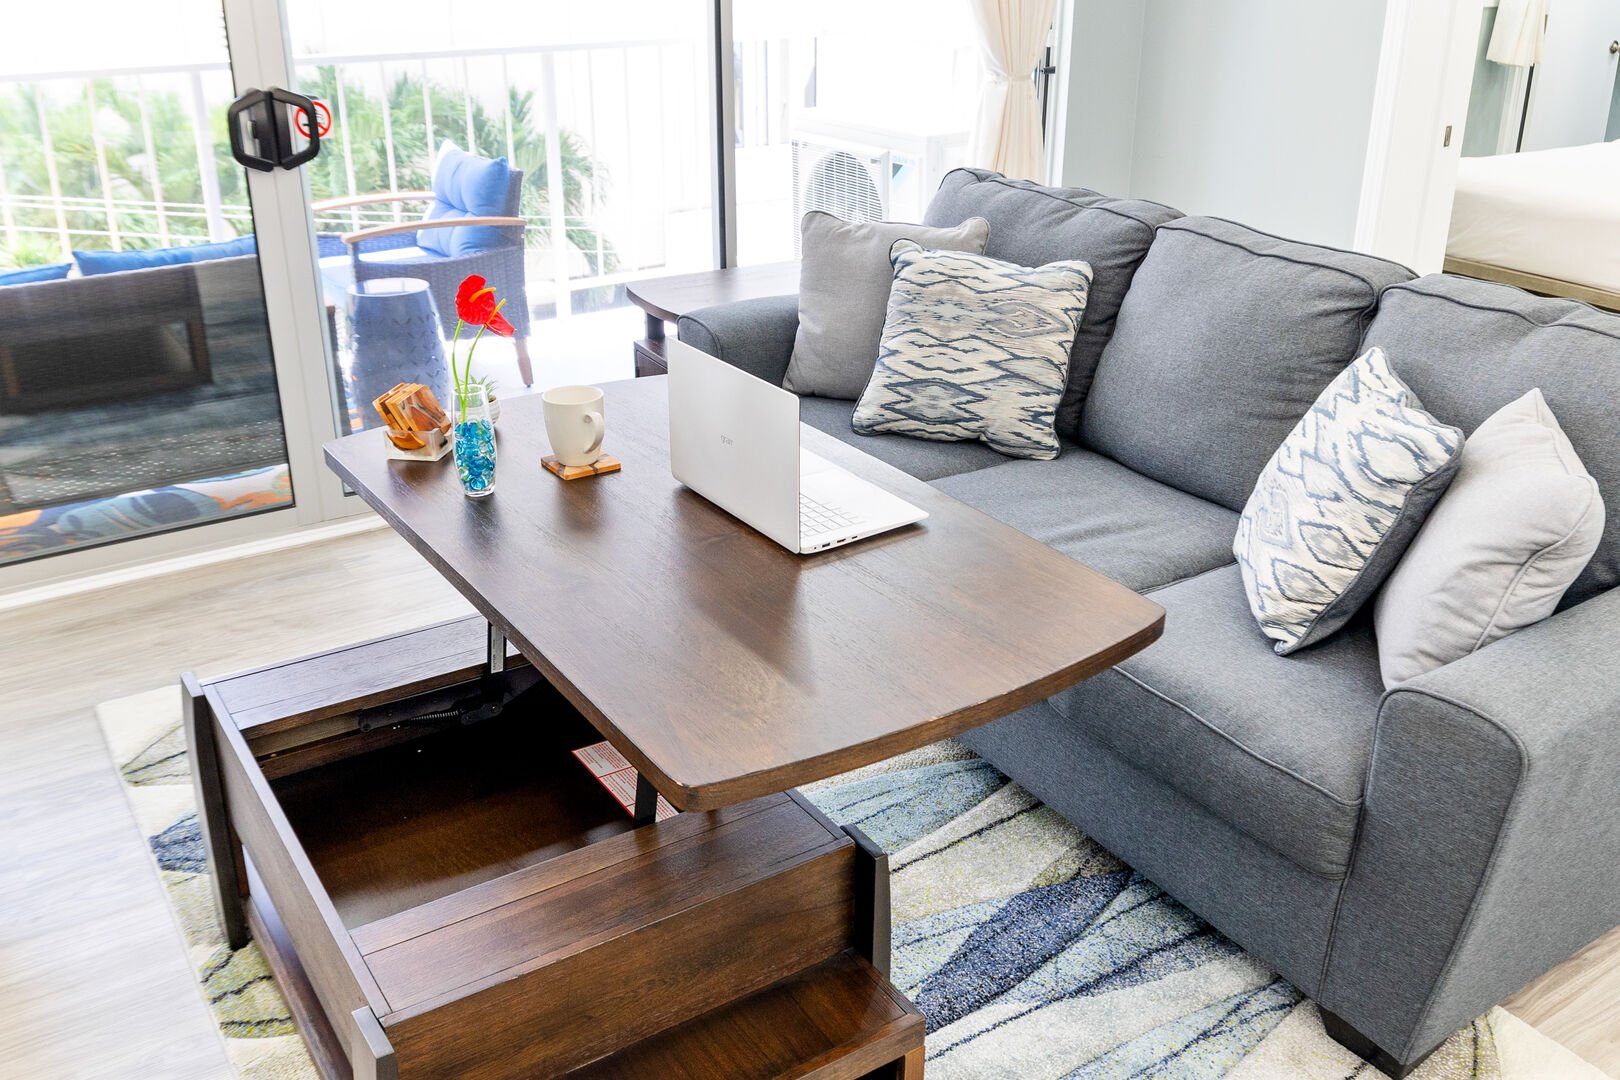 Feel at ease working in the living room while sitting on the queen-size sleeper sofa!